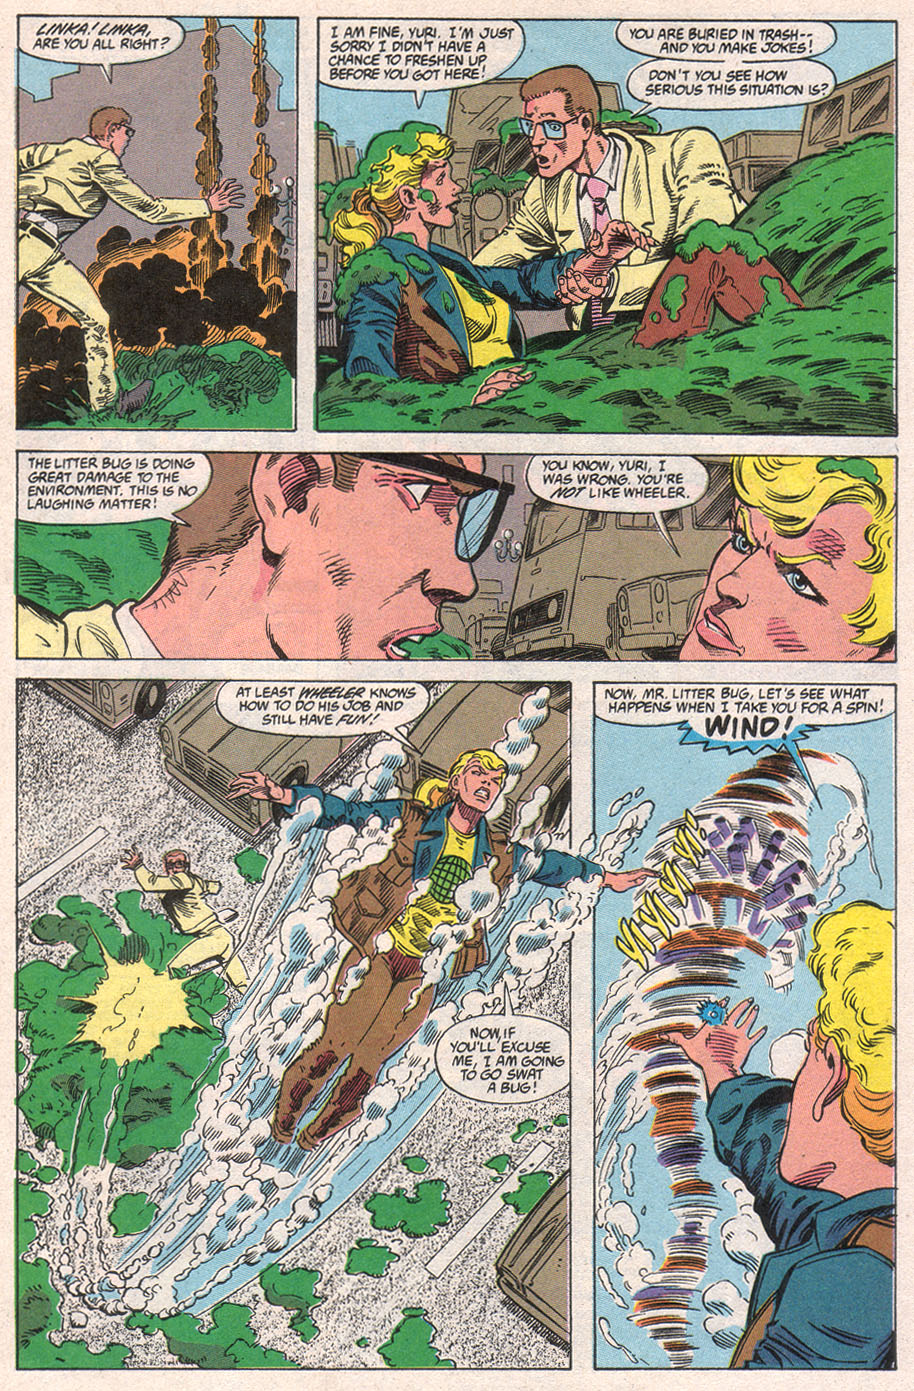 Captain Planet and the Planeteers 10 Page 28